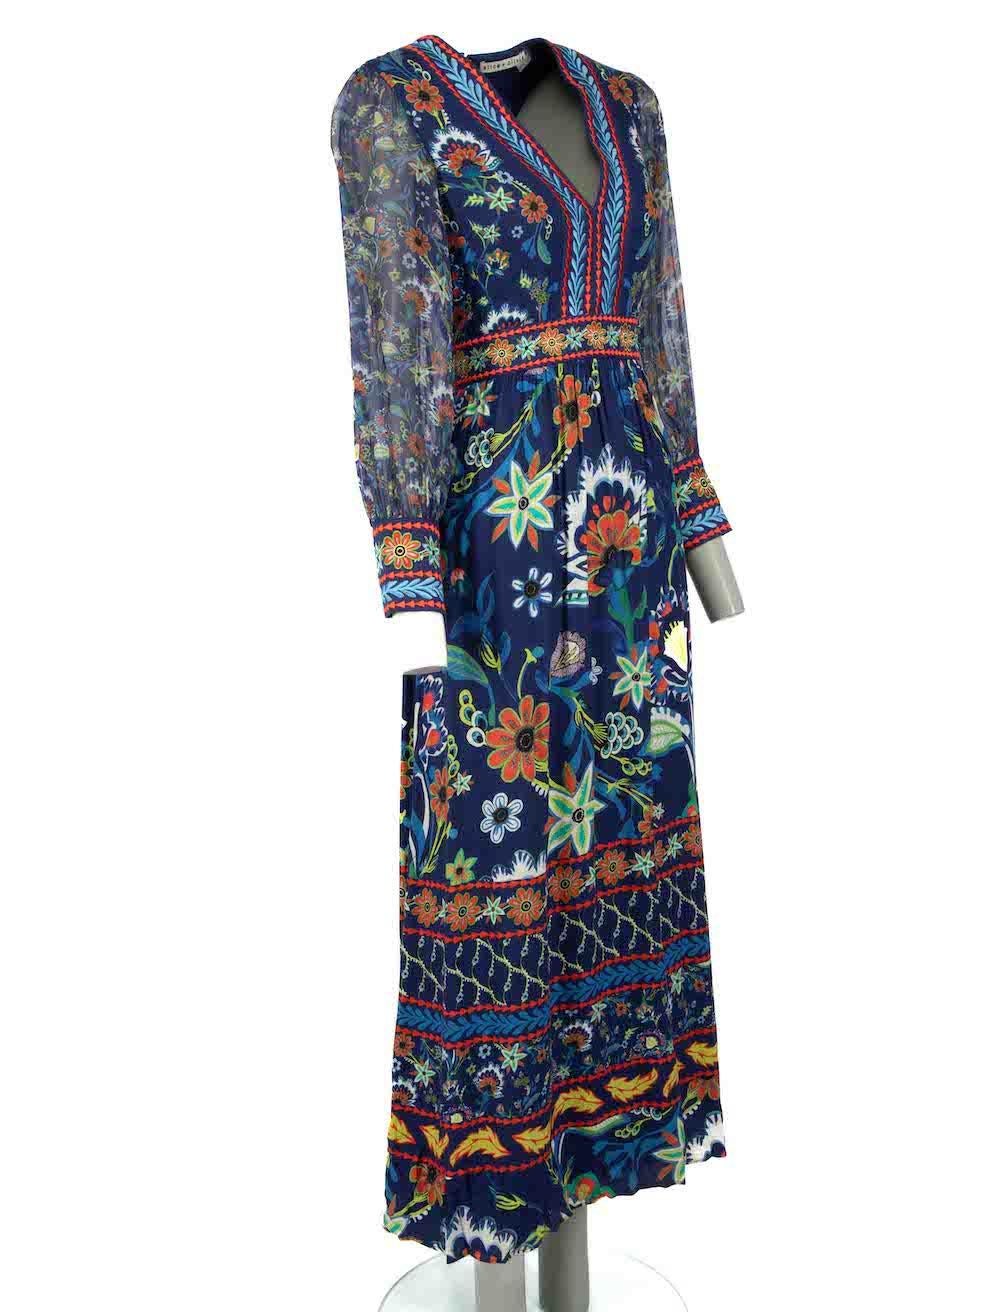 CONDITION is Very good. Minimal wear to dress is evident. Minimal pull to thread to rear skirt on this used Alice + Olivia designer resale item.
 
Details
Multicolour
Viscose
Maxi dress
Floral pattern
Sheer sleeves
V neckline 
Embroidered accent